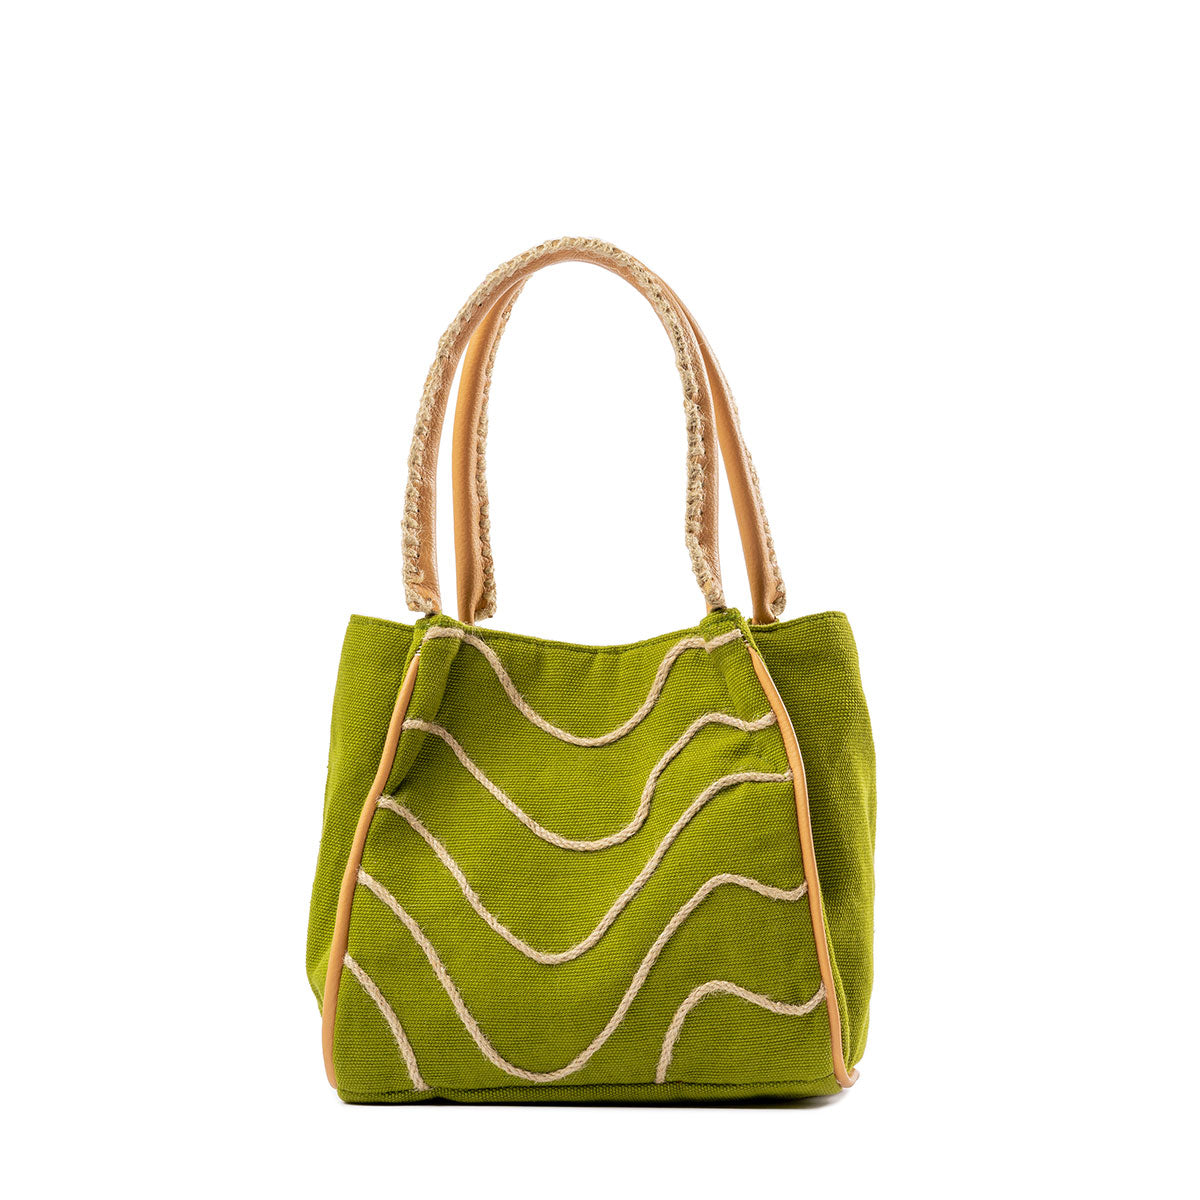 Front of the hand woven artisan Flora Petite Crossbody in Turf Moss. The Turf Moss pattern has wavy horizontal lines over a green background. It has embroidered detailing on the leather handles. It is shown without the leather strap.